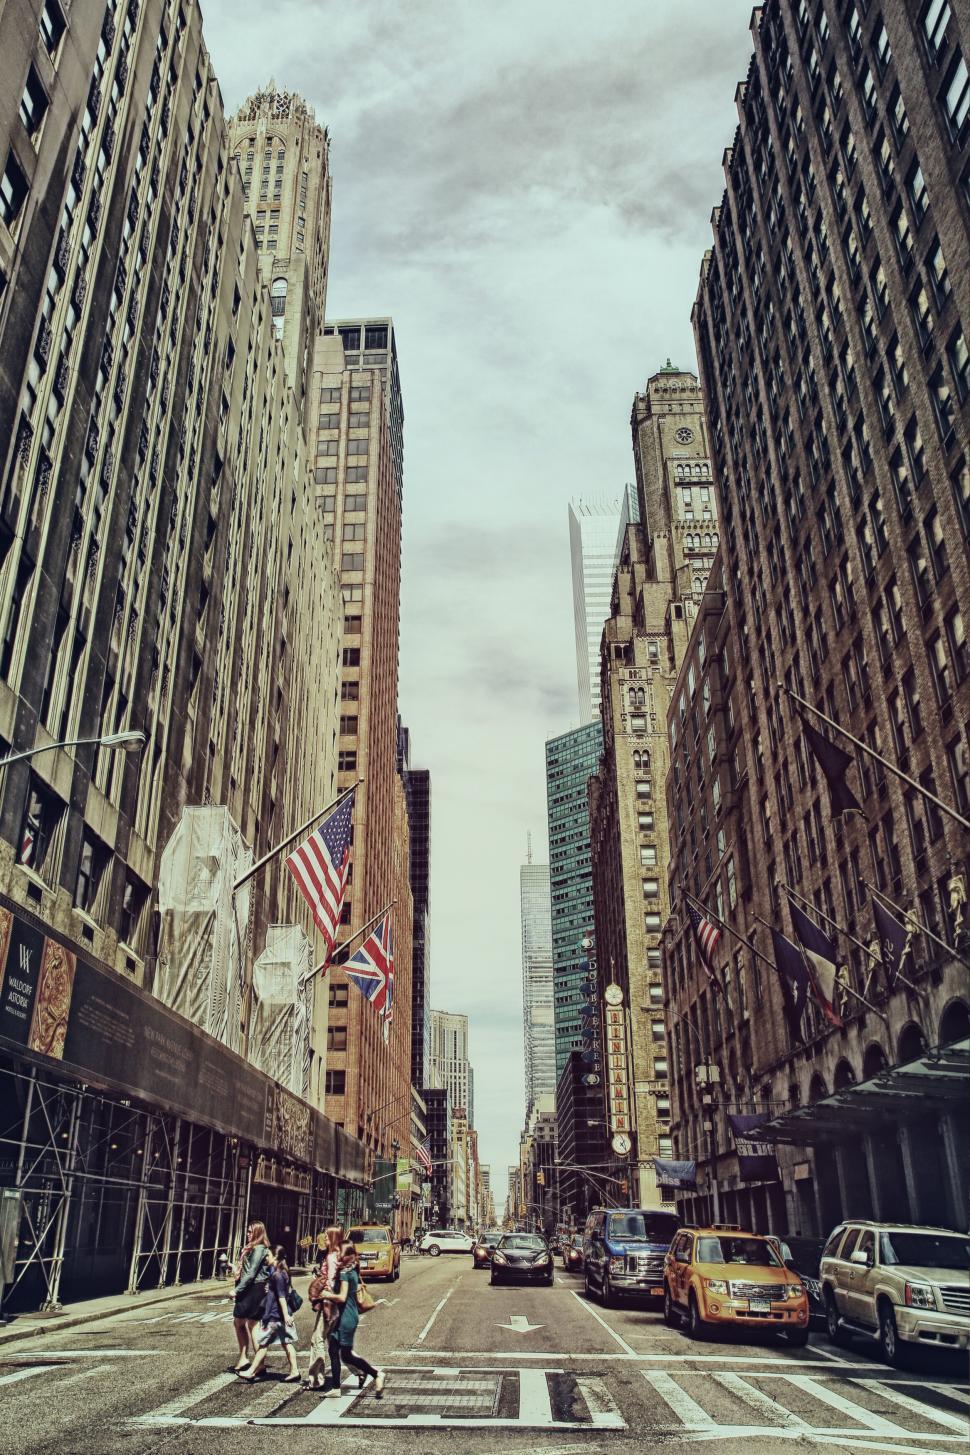 Free Image of Bustling New York City street in warm tones 